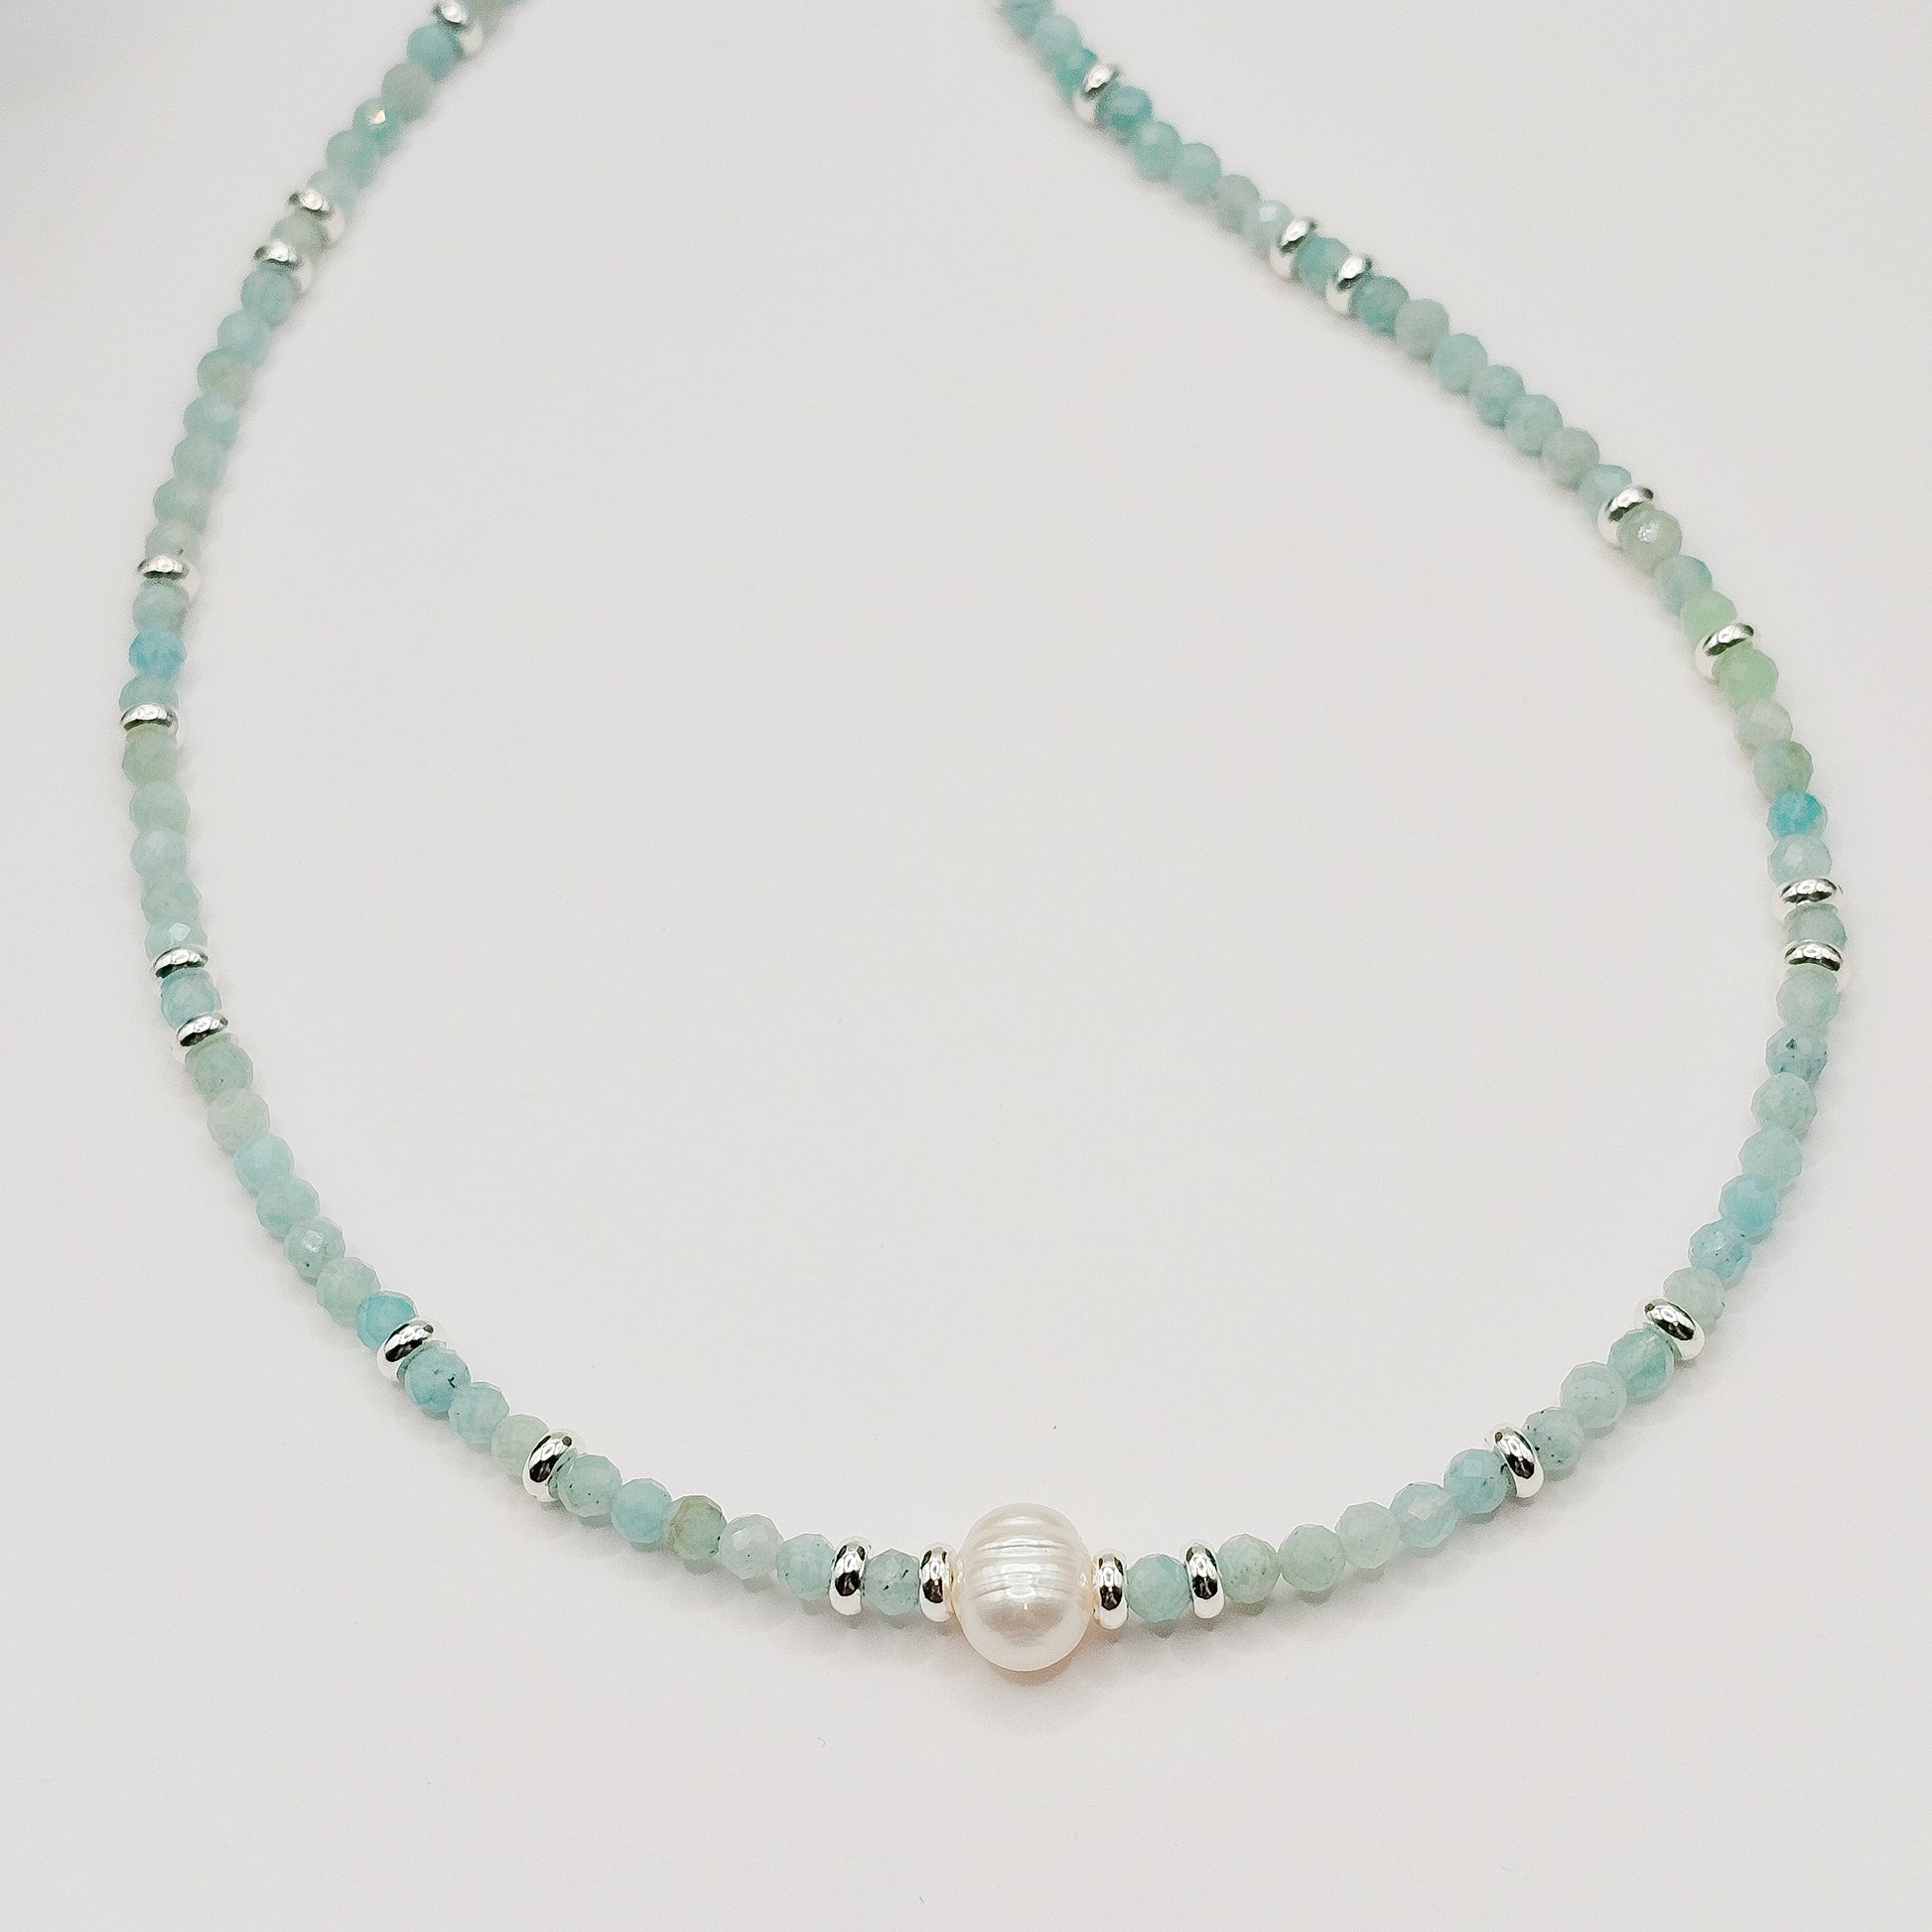 Amazonite pearl necklace | gift for women, gift for friend, gift for mum, gift for mom, handmade gemstone jewellery, handmade crystal jewelry, anniversary gift, dainty gemstone jewellery, petite jewellery, ooak necklace, australia, melbourne